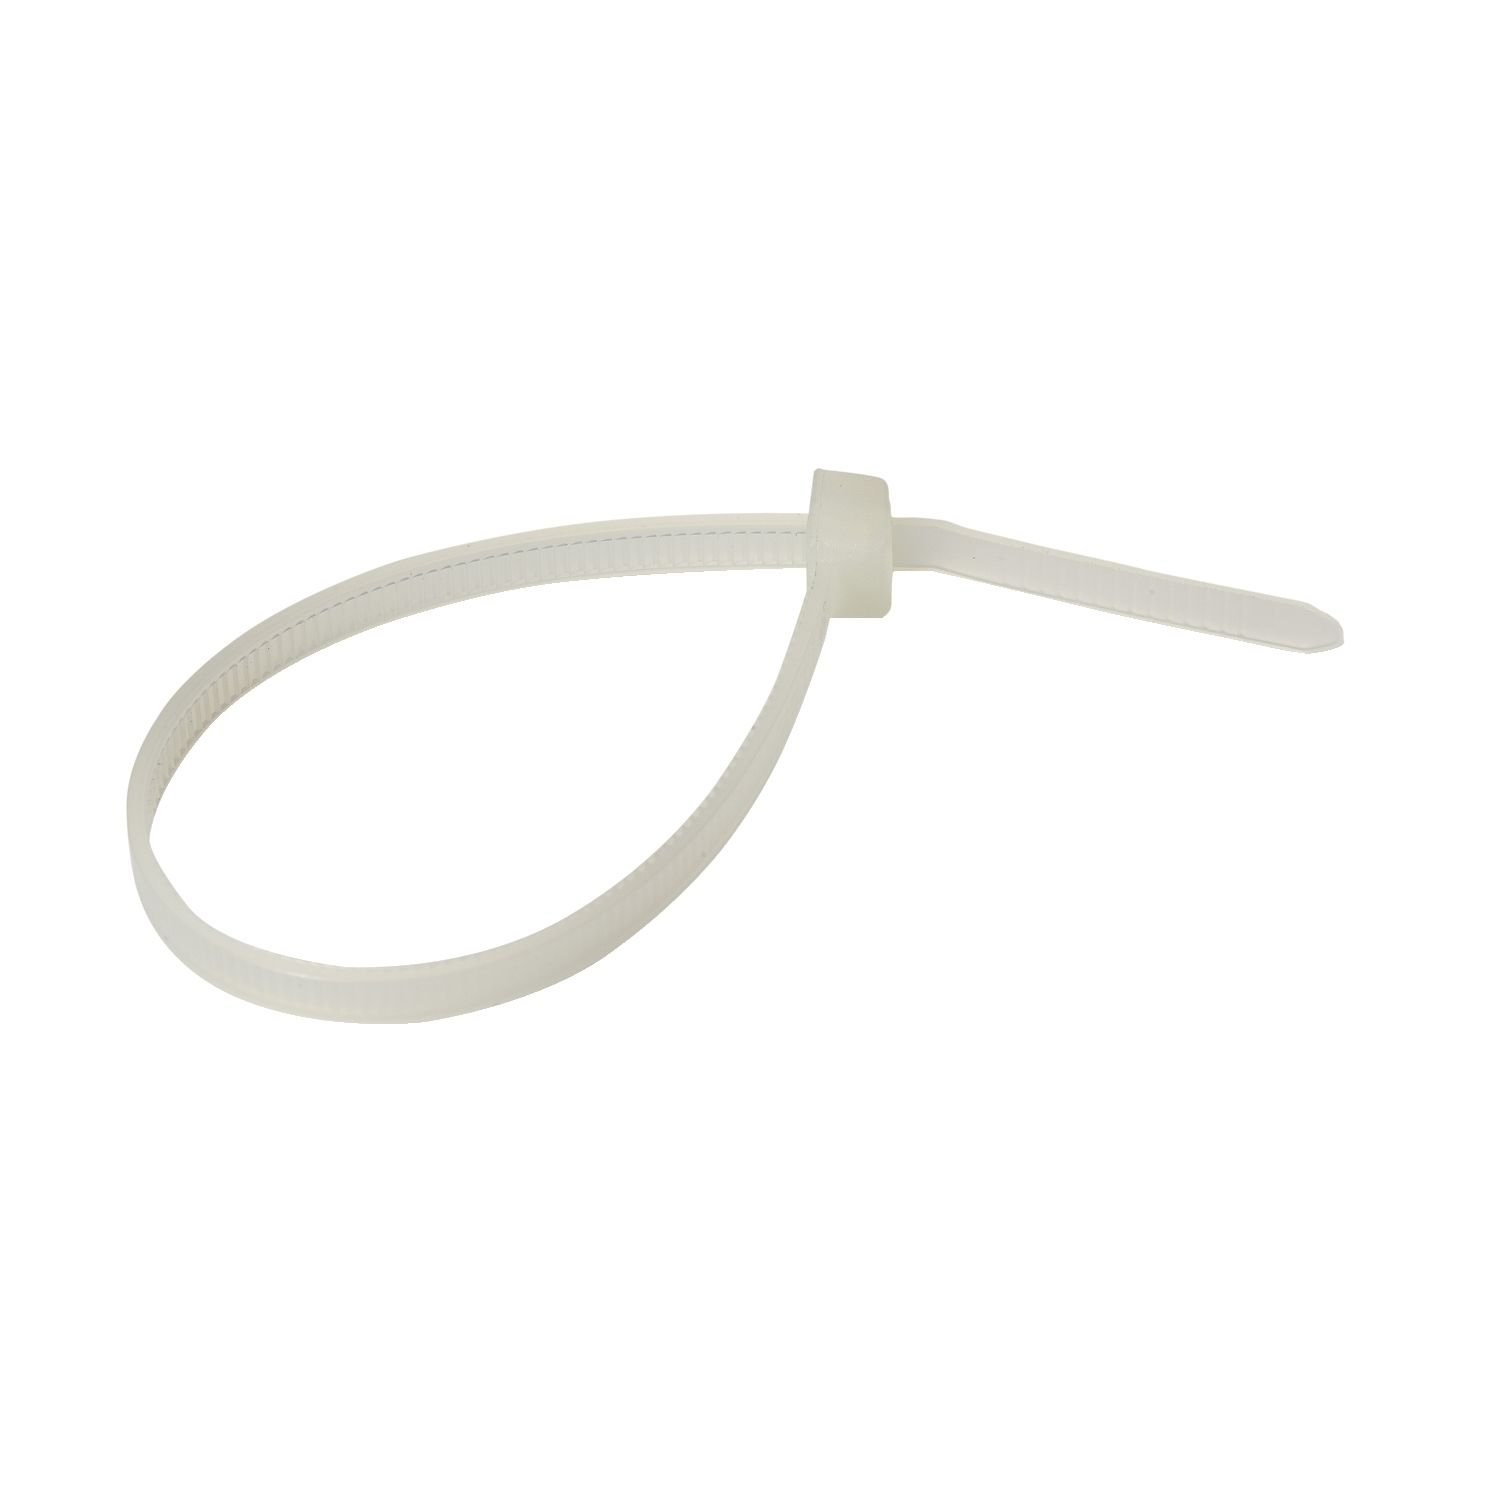 IMT46101 Cabling cable tie 200mmx4.8mm, clear colour, 100 pieces pack, material PA6.6